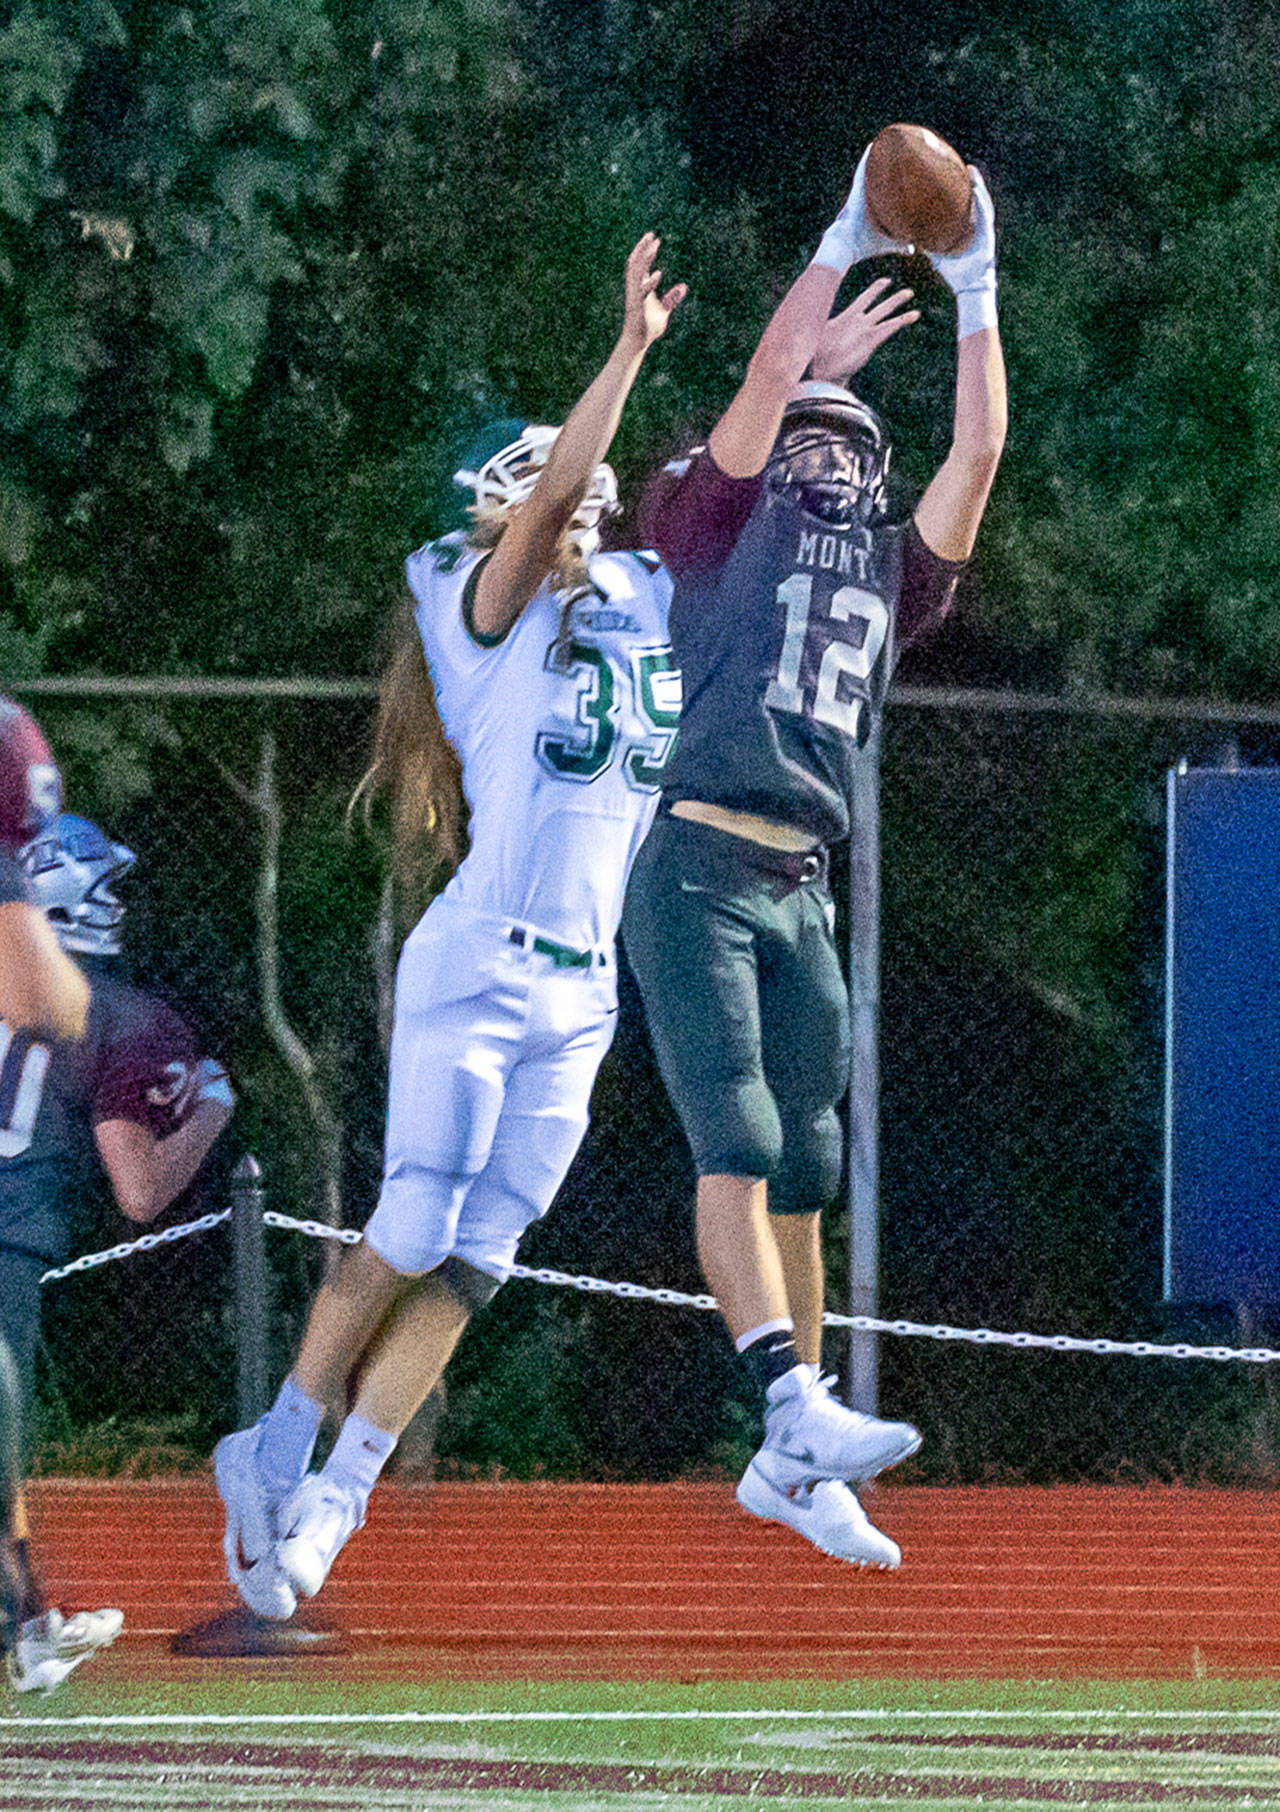 Montesano’s Sam Winter (12) intercepts a pass against Port Angeles recevier Derek Bowechop during the Bulldogs’ 70-12 rout of the Roughriders on Friday at Jack Rottle Field in Montesano. (Hasani Grayson | Grays Harbor News Group)